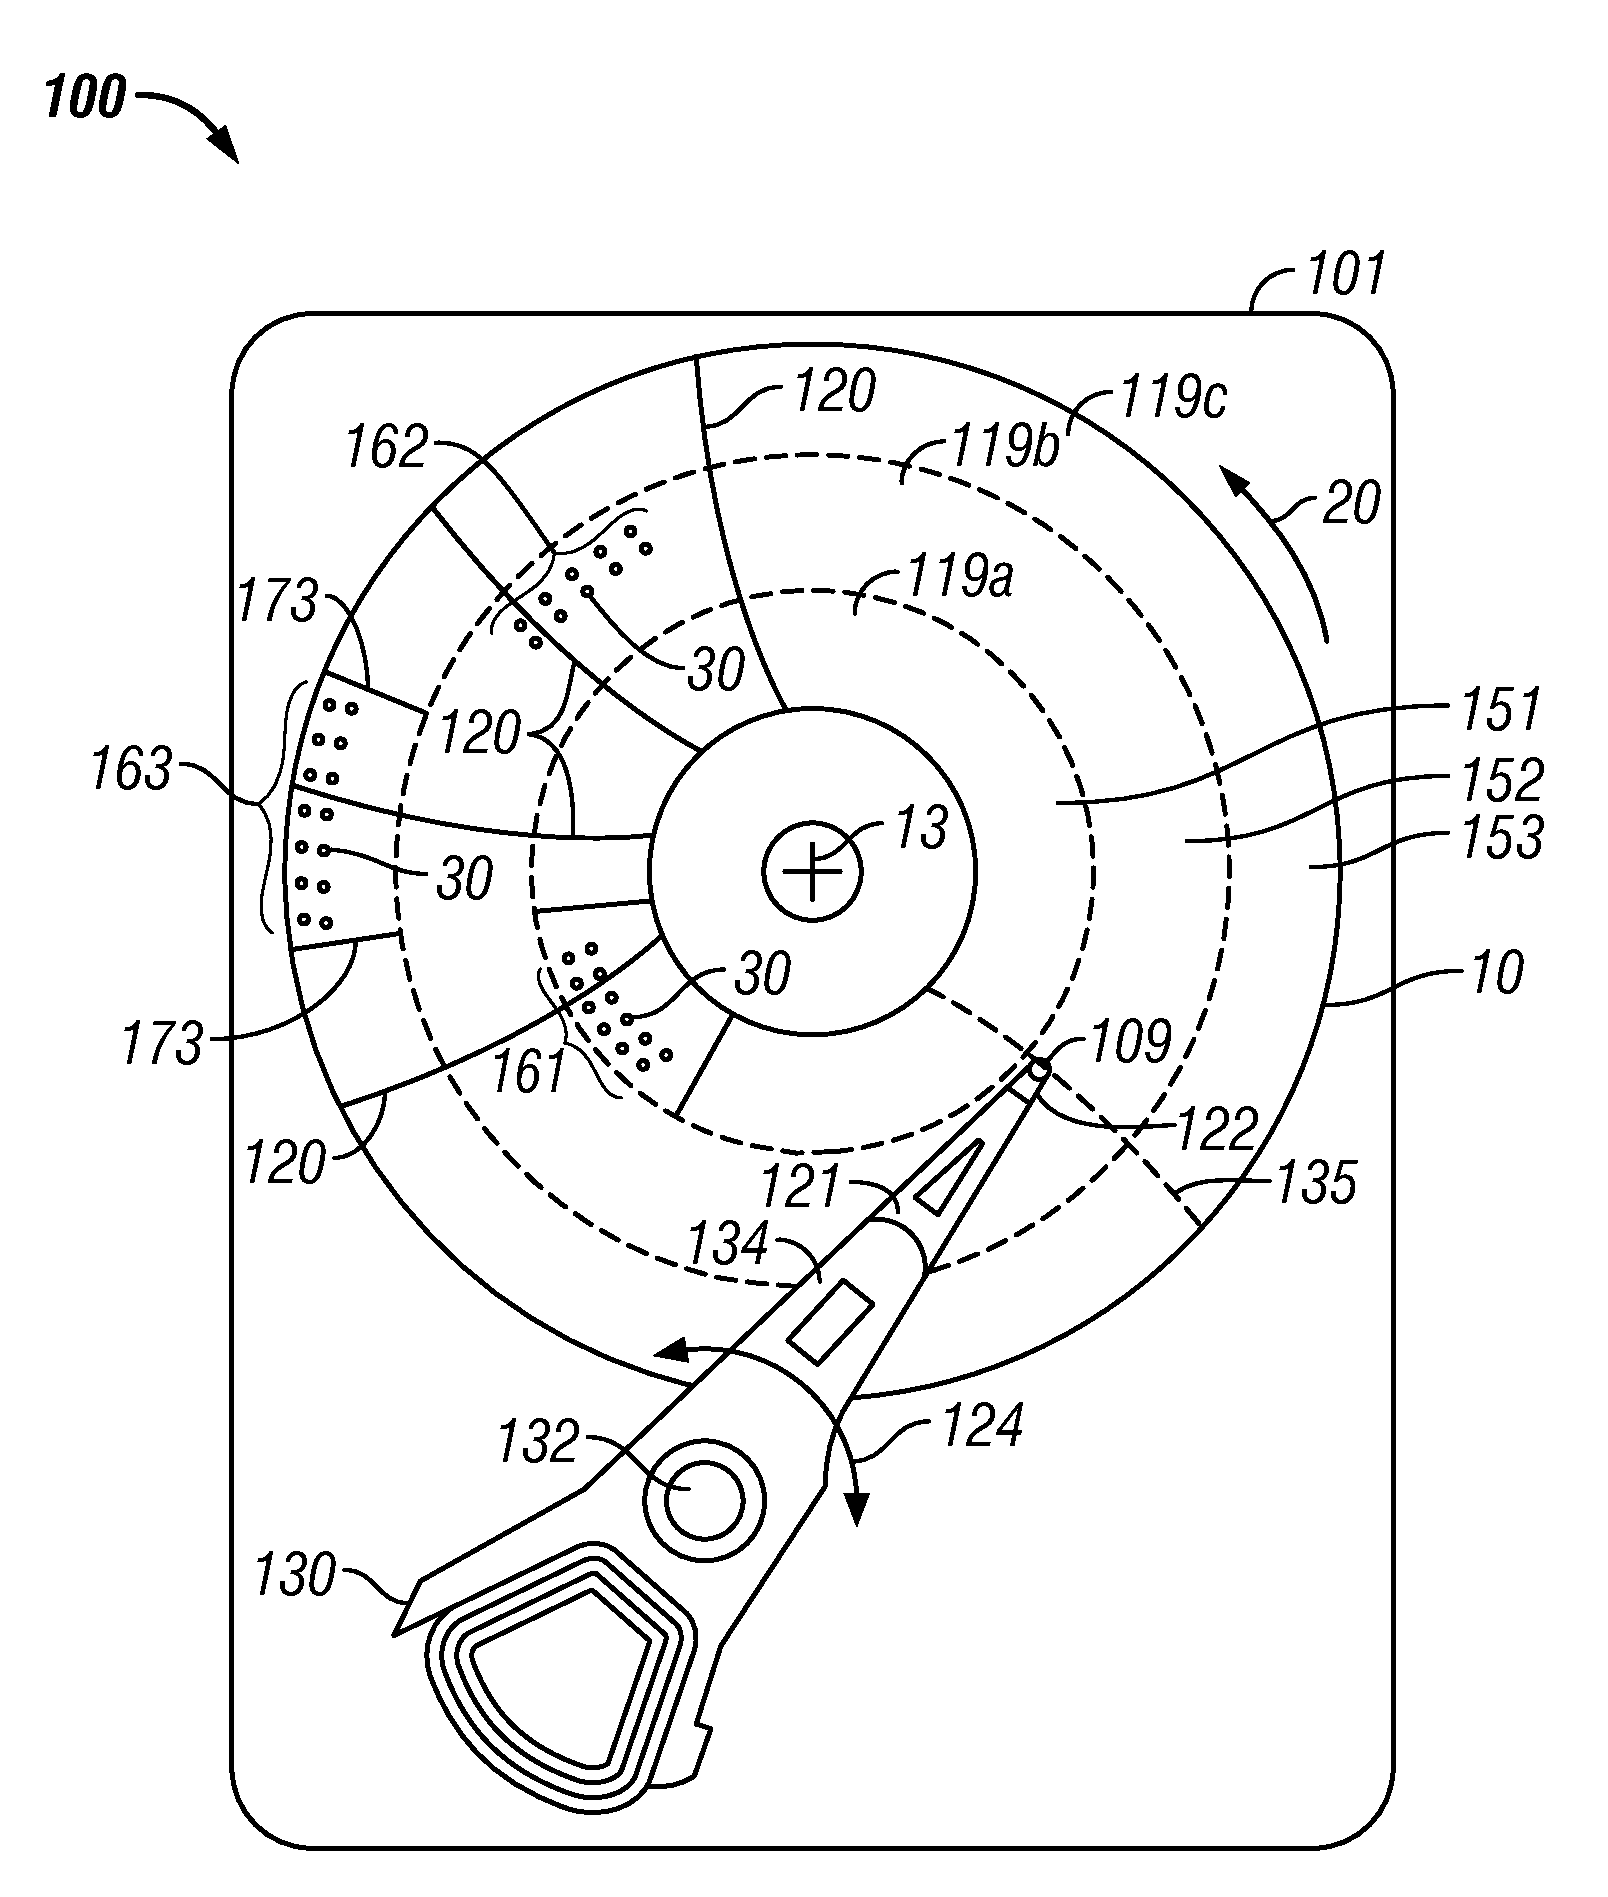 Patterned media magnetic recording disk drive with write clock phase adjustment for write head track misregistration